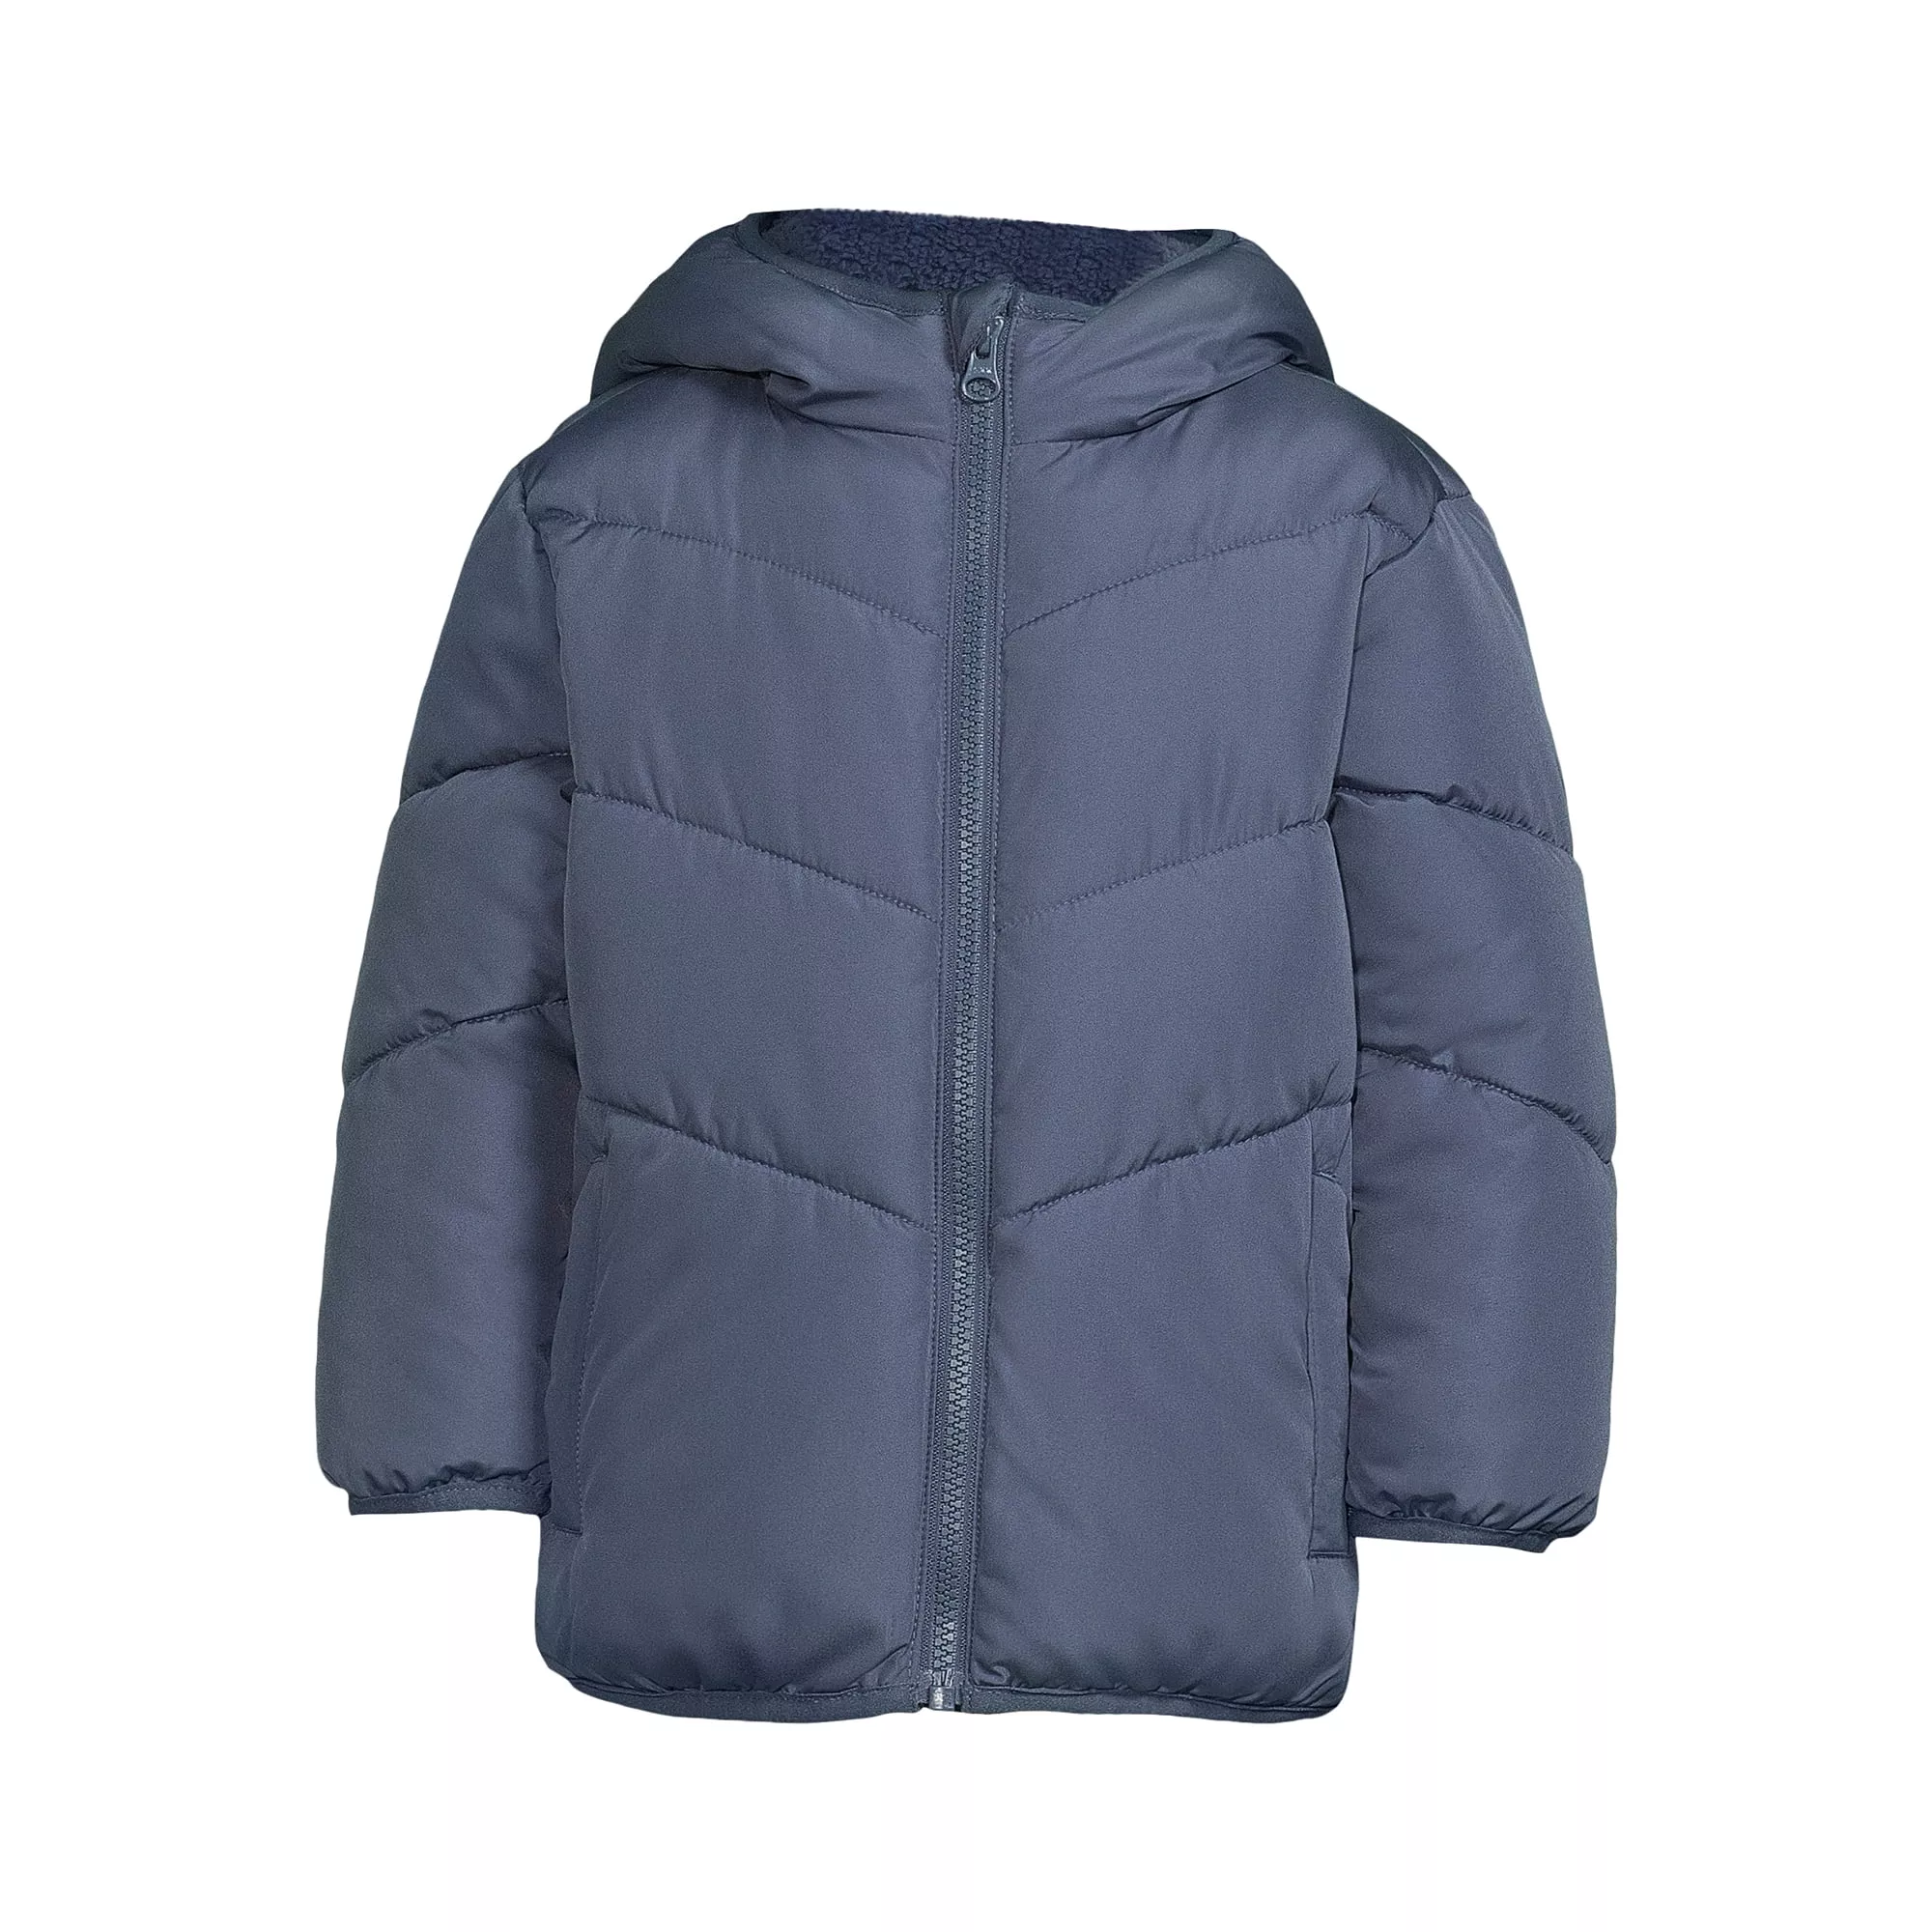 Swiss Tech Baby and Toddler Girls Puffer Jacket with Hood, Sizes 12M-5T 